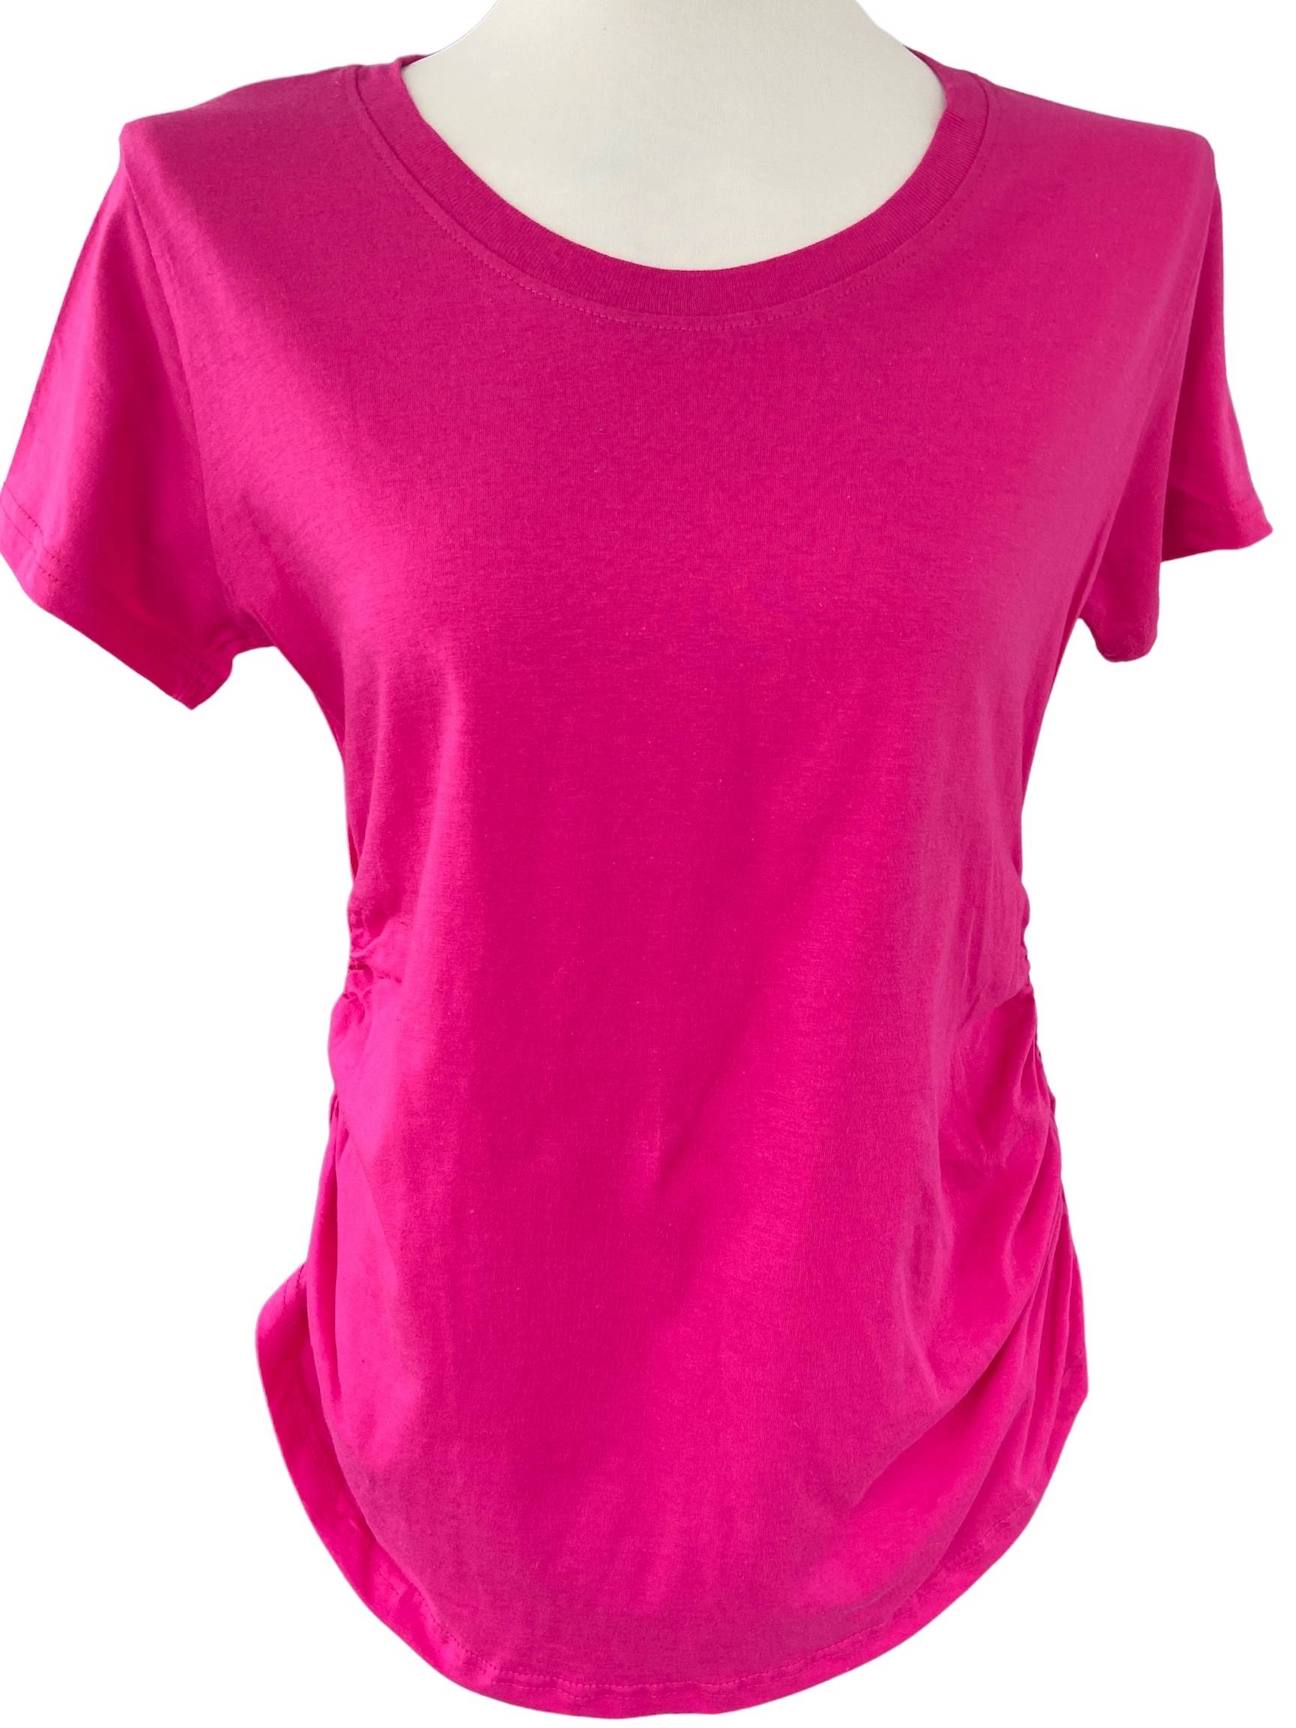 Bright Spring CRAZY DOG peony pink ruched tee